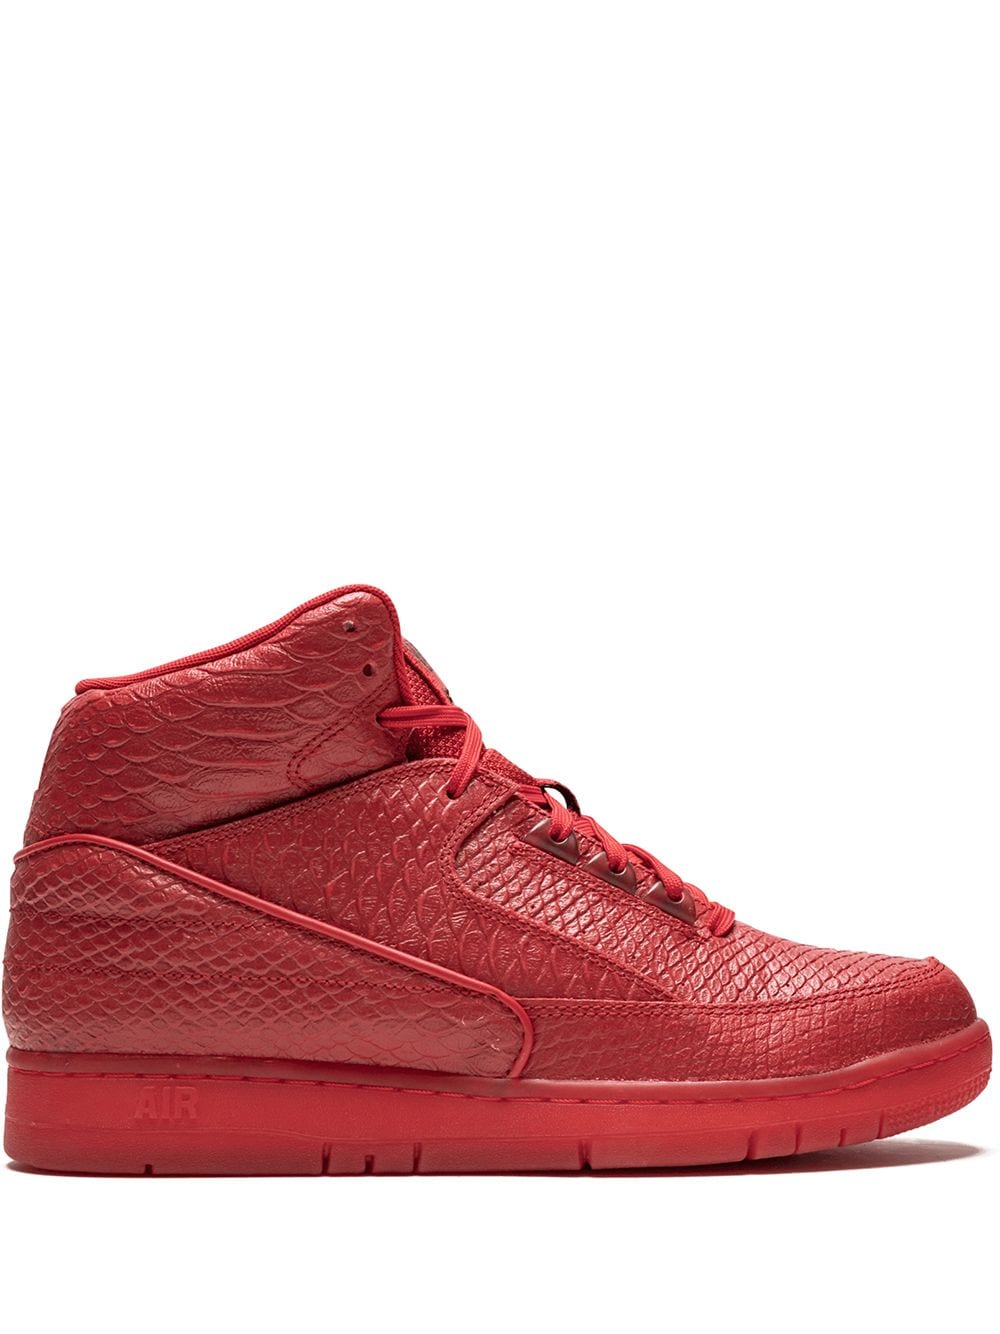 Nike Air Python PRM "Red October" sneakers von Nike